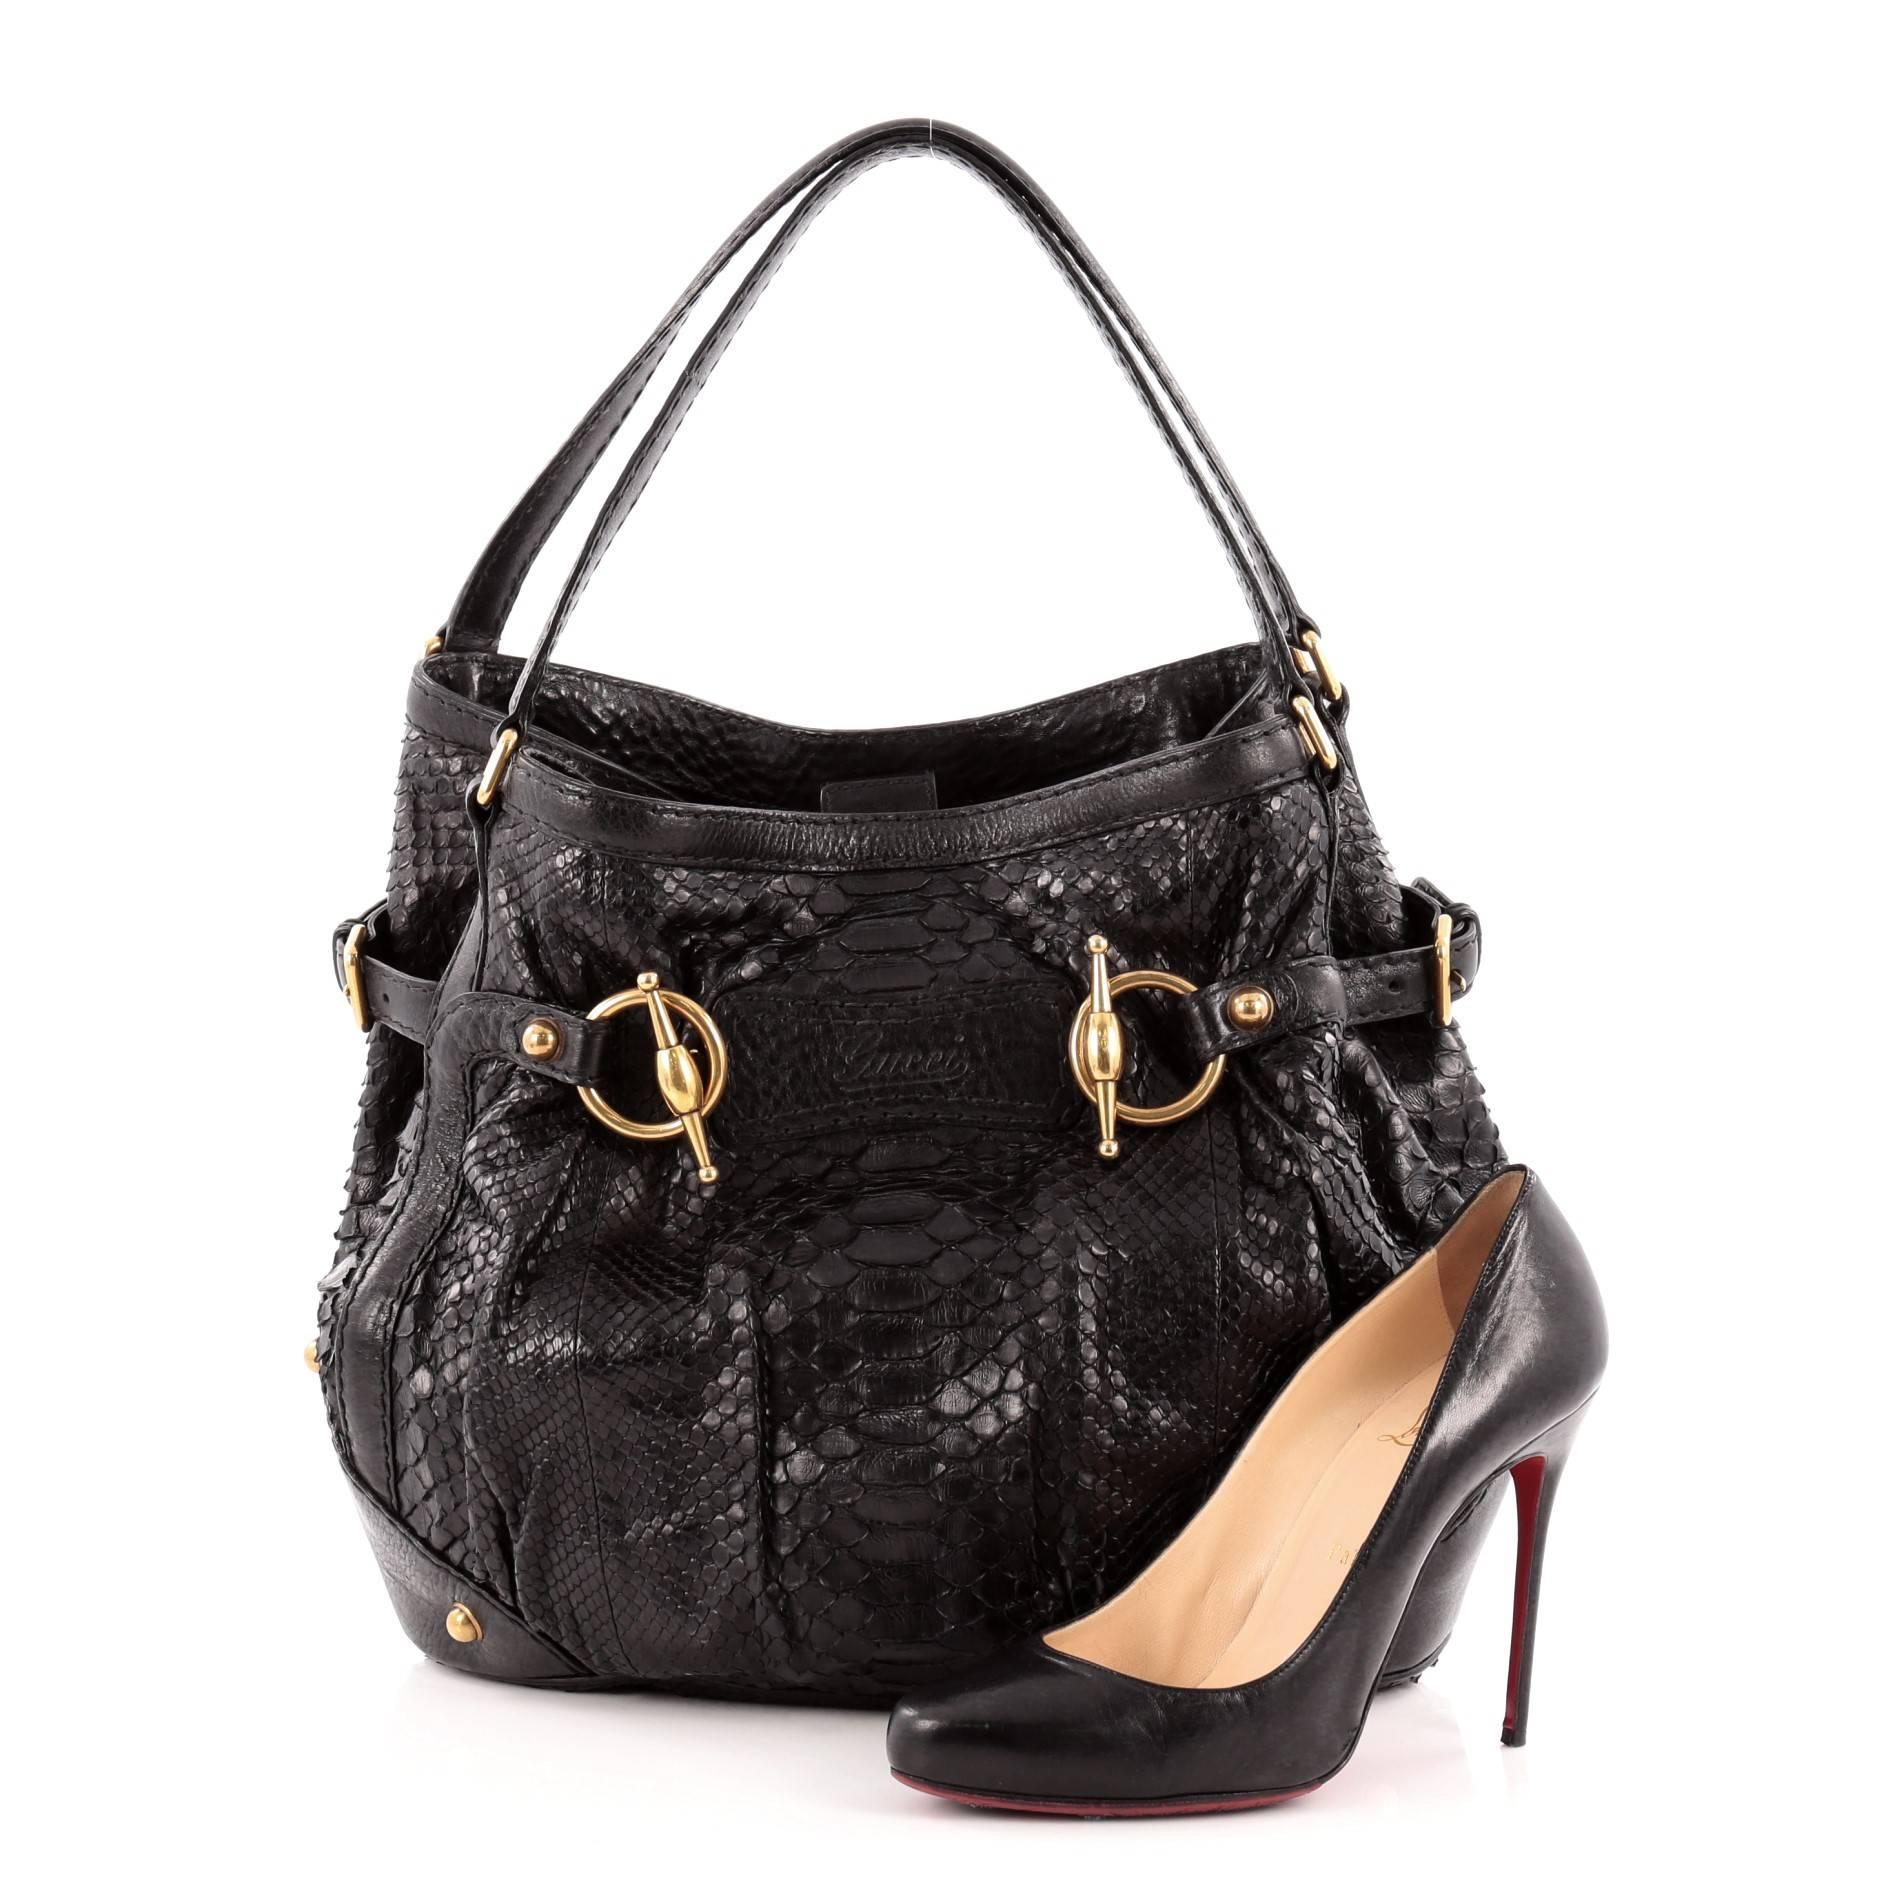 This authentic Gucci Jockey Tote Python Medium is perfect for all seasons. Crafted from black genuine python skin, this luxurious tote features dual-flat leather top handles, black leather trims, decorative horsebit detailing, handwritten logo, and